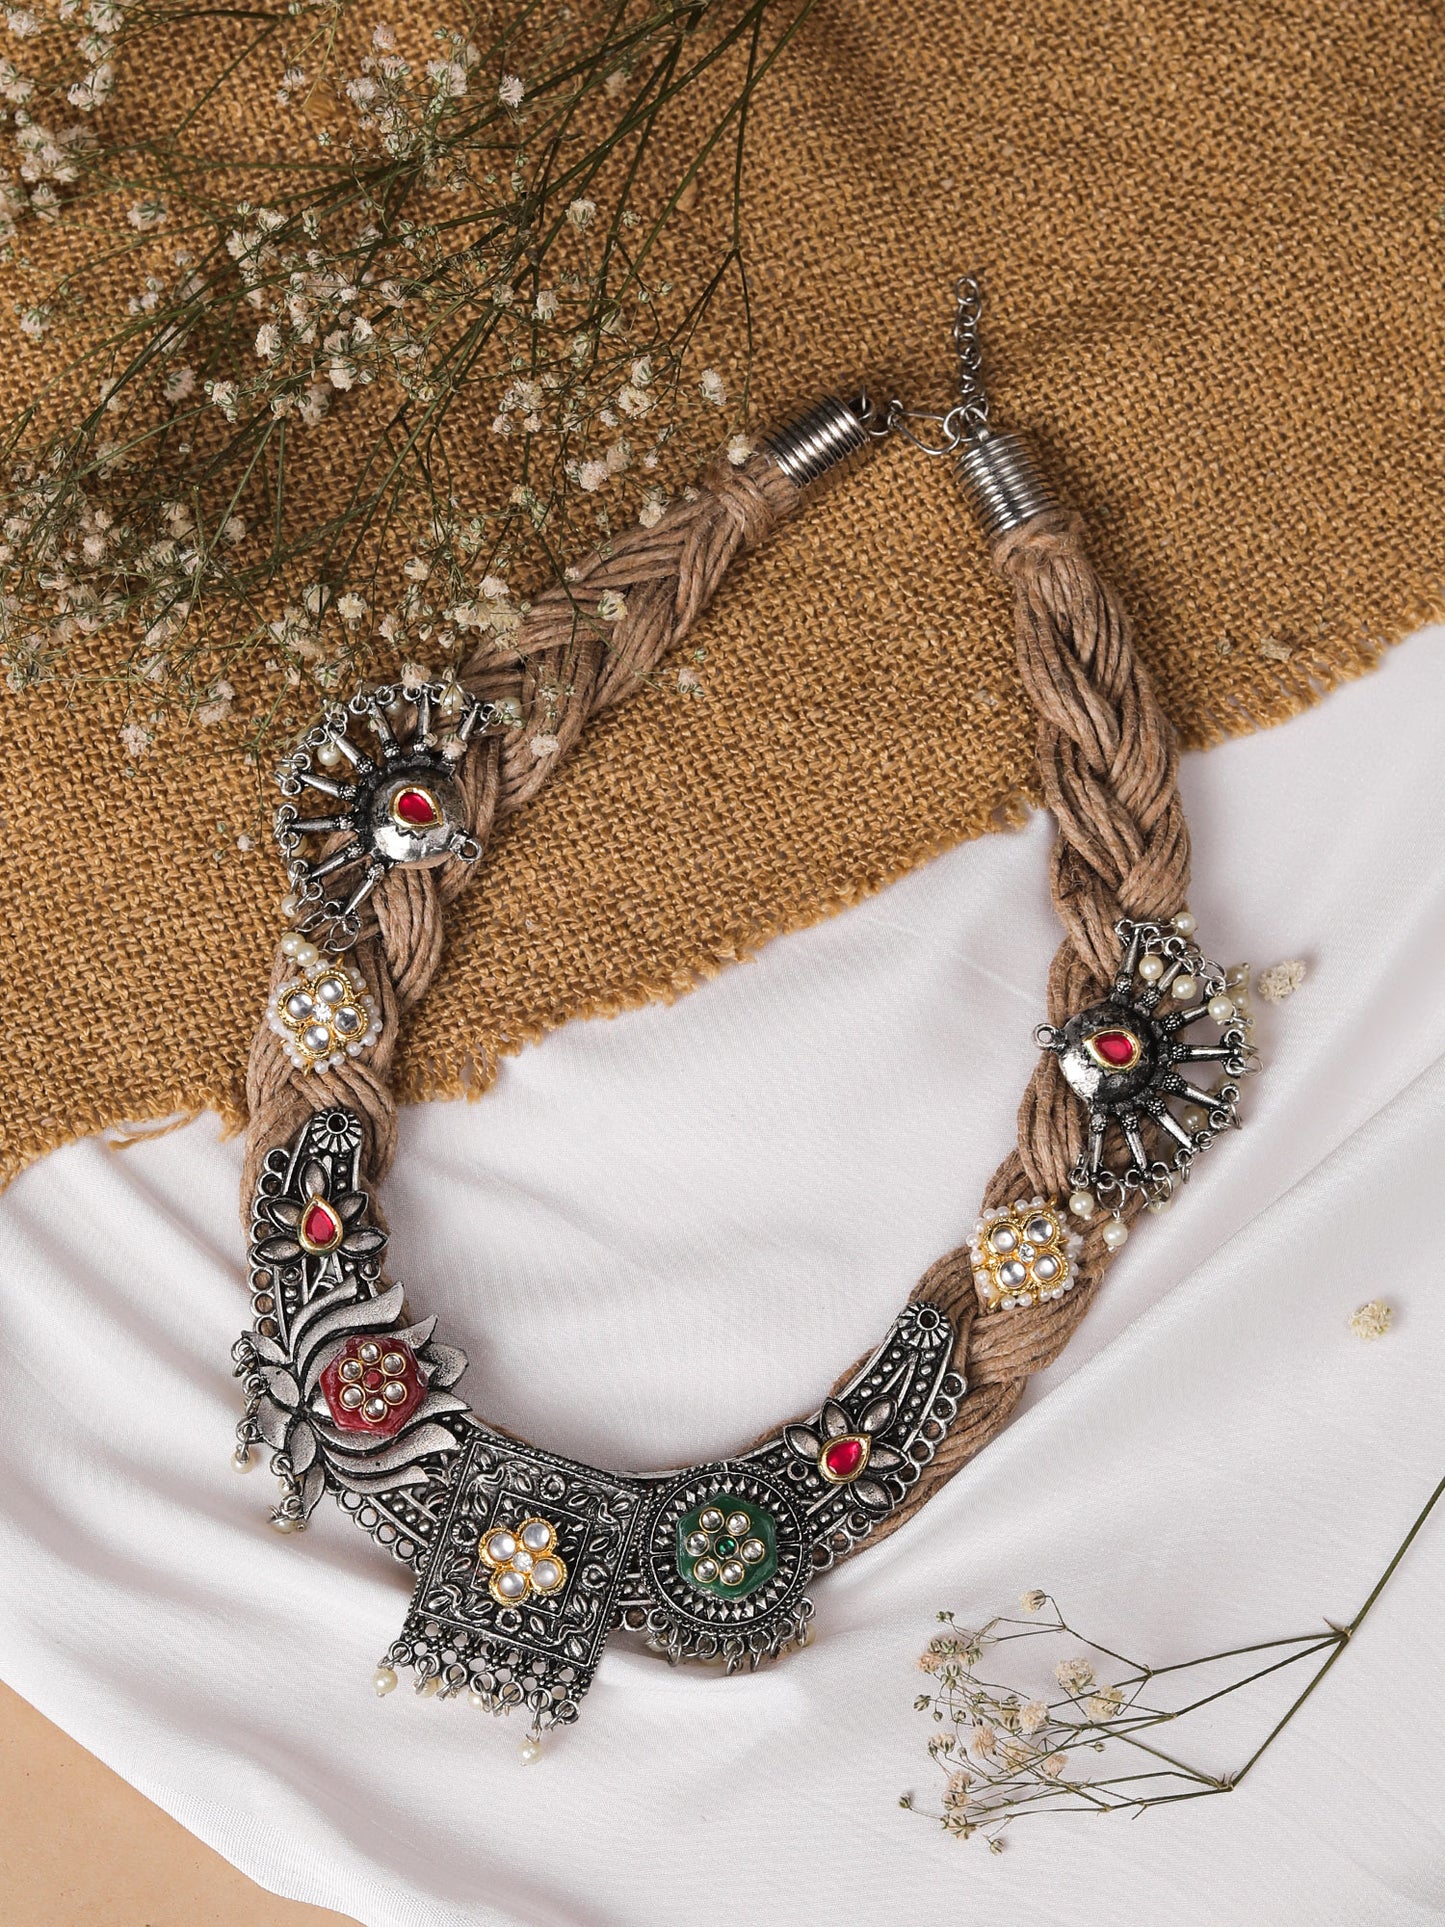 The Florid Knotted Persian Yarn Jute Necklace